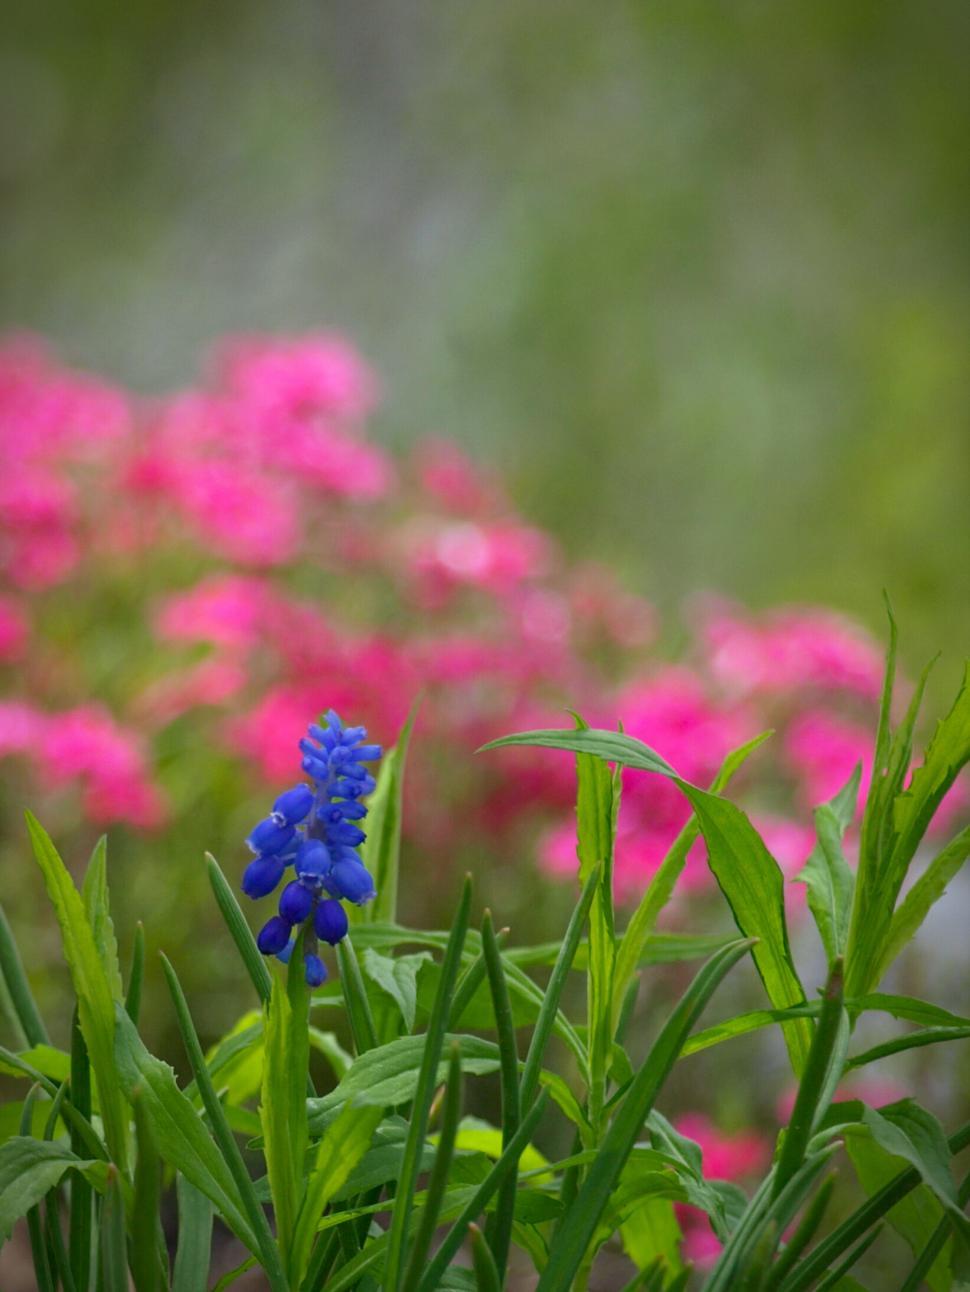 Free Image of Blue flower amidst pink blooms background 